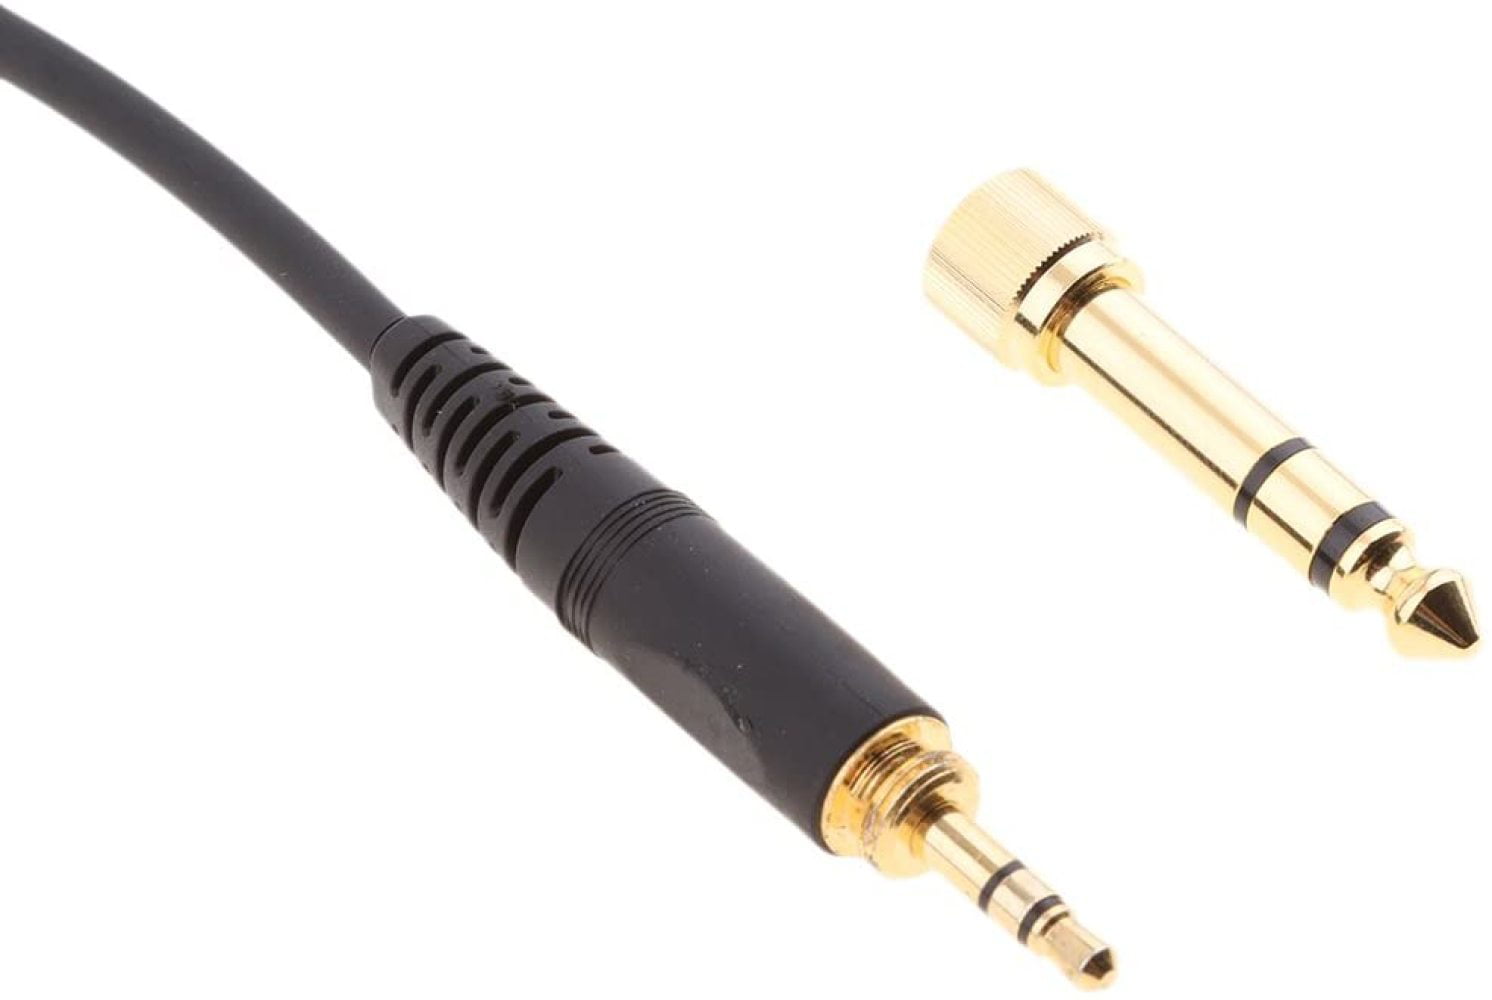 130cm Replacement Coiled Upgrade Cable for AKG K141 K171 K181 K240 Pioneer HDJ-2000 Headphone